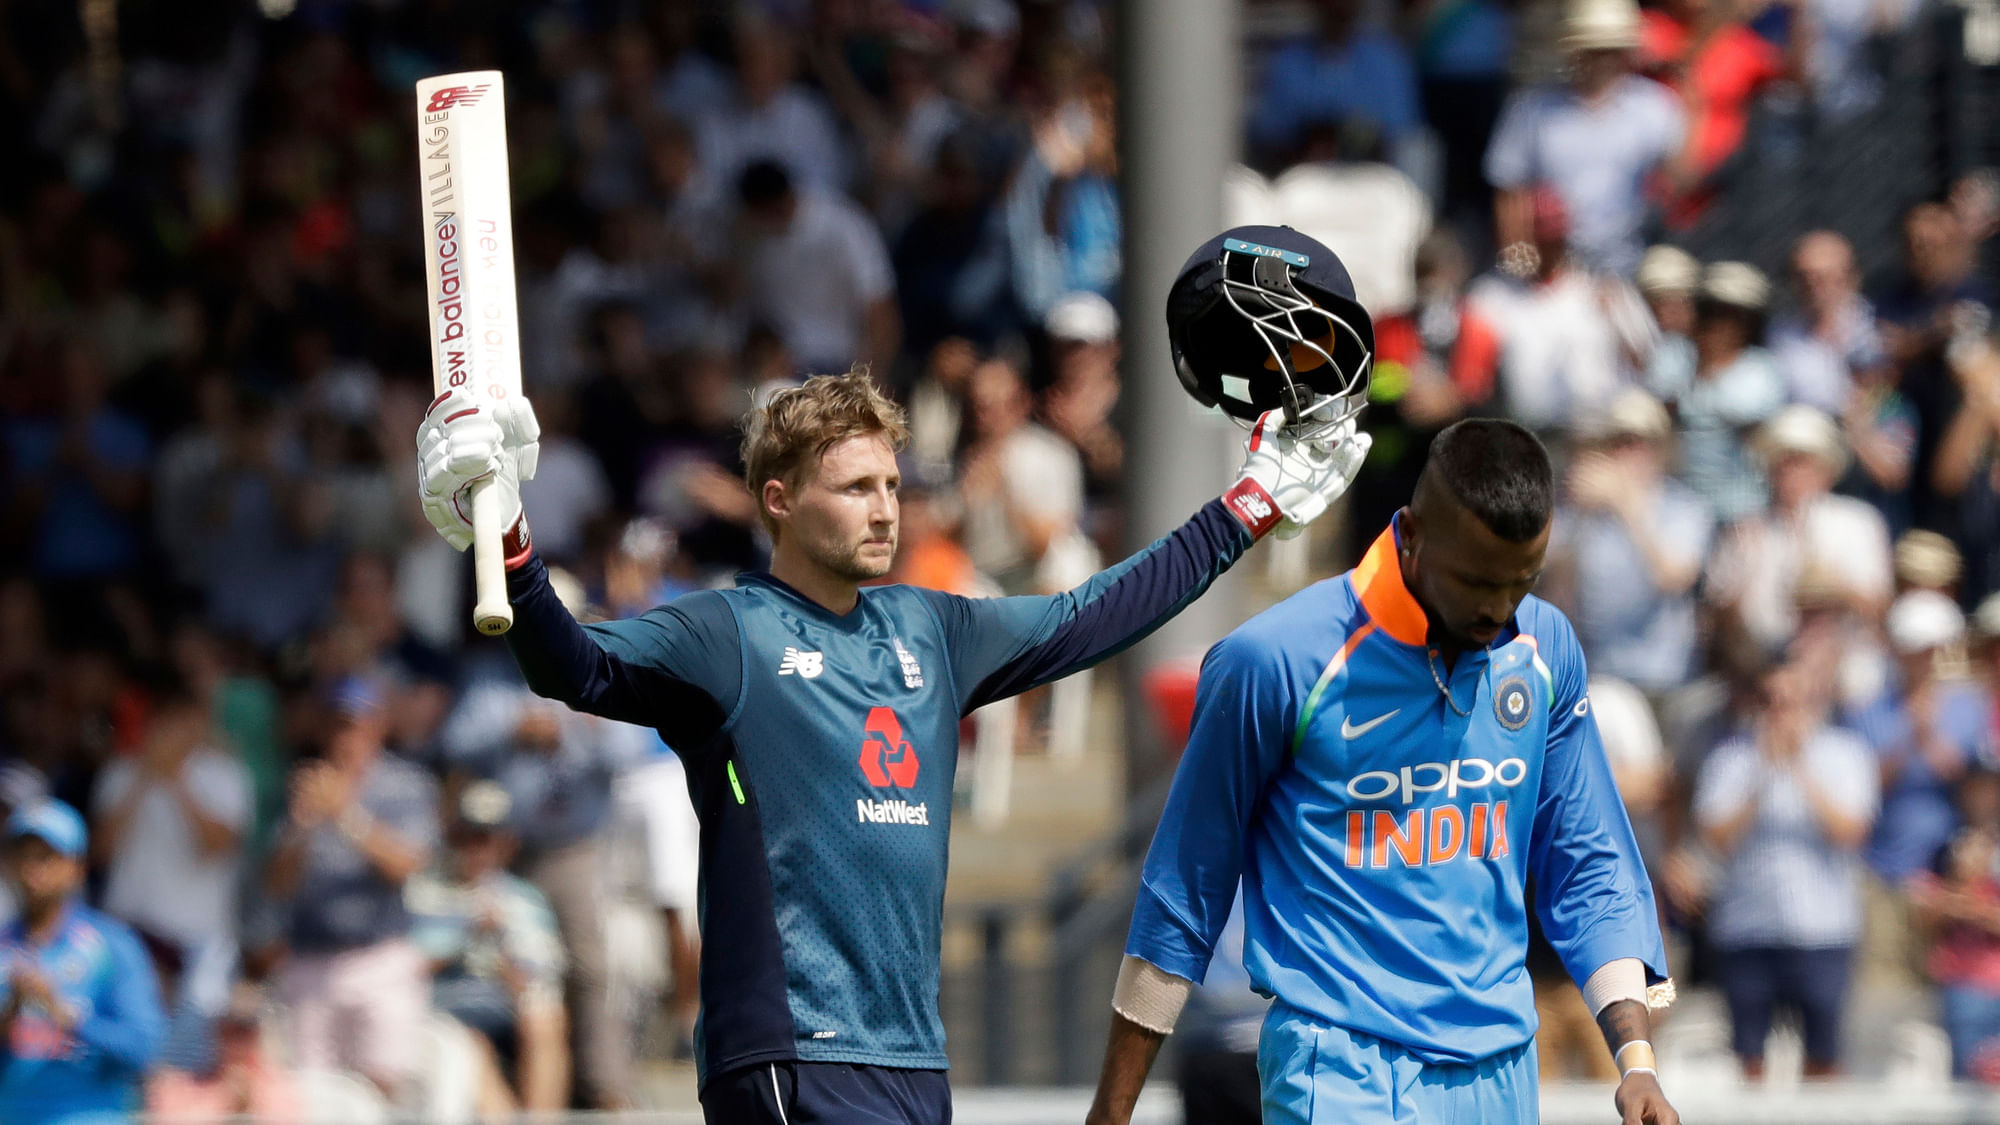 England’s Joe Root celebrates his century nest to India’s Hardik Pandya during the one day cricket match between England and India at Lord’s cricket ground in London.